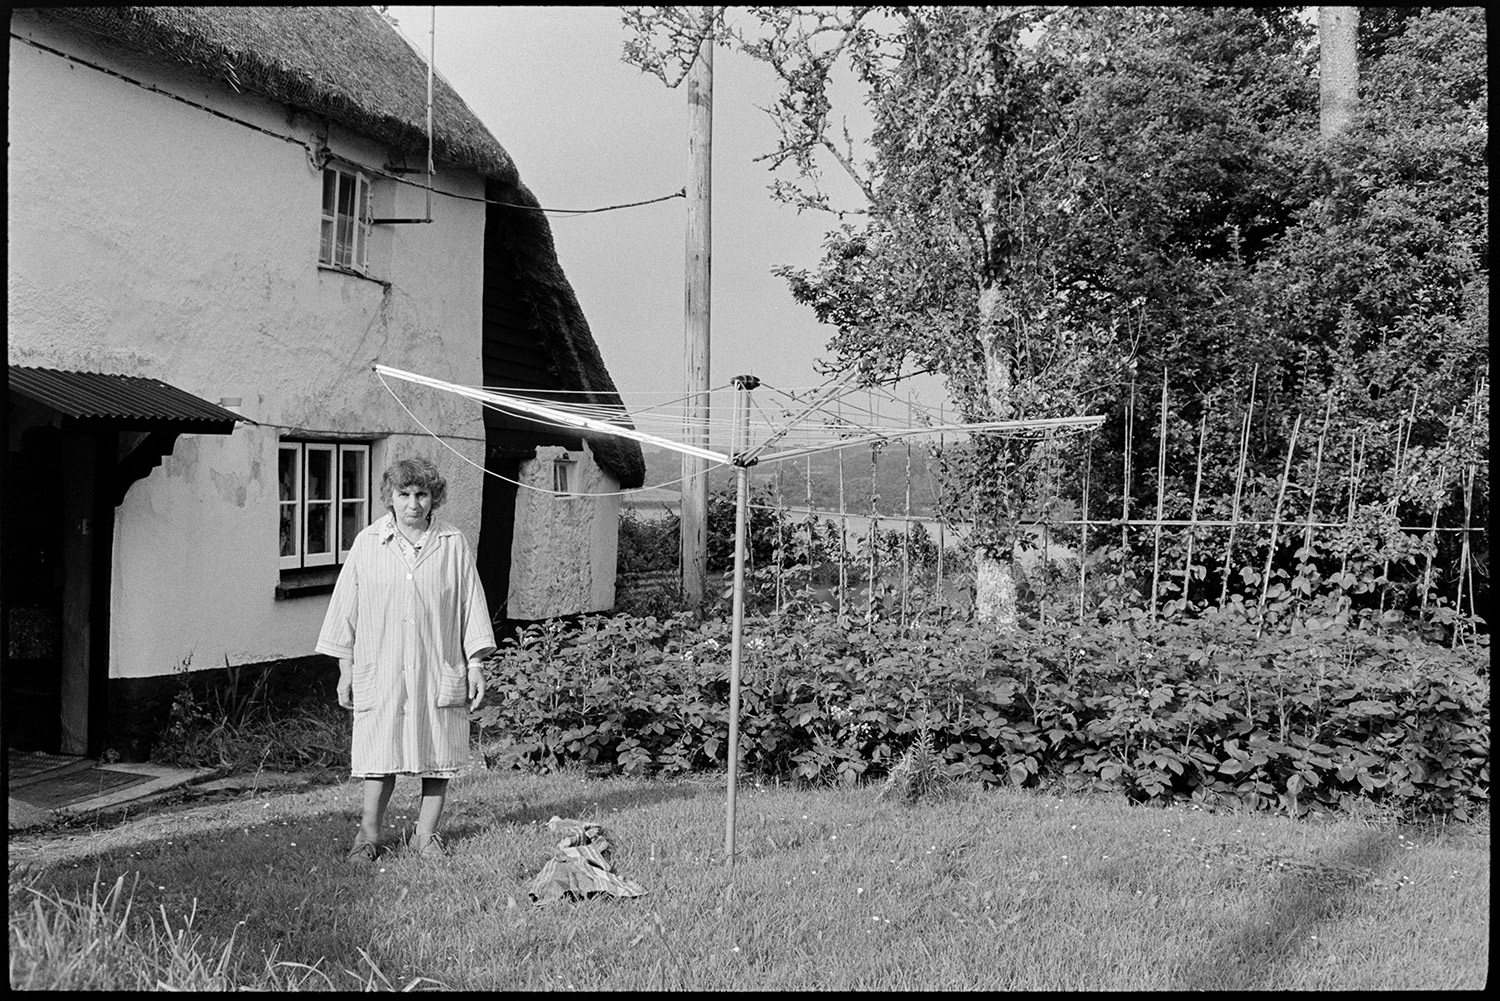 Woman in cottage garden with dog, stand for washing.
[Mrs Piper is standing on the lawn of her garden at Nethercott Cross, beside a rotary washing line. Her cob and thatch cottage, with a corrugated iron porch roof can be seen in the background. There are potatoes and runner beans growing in the garden behind her.]